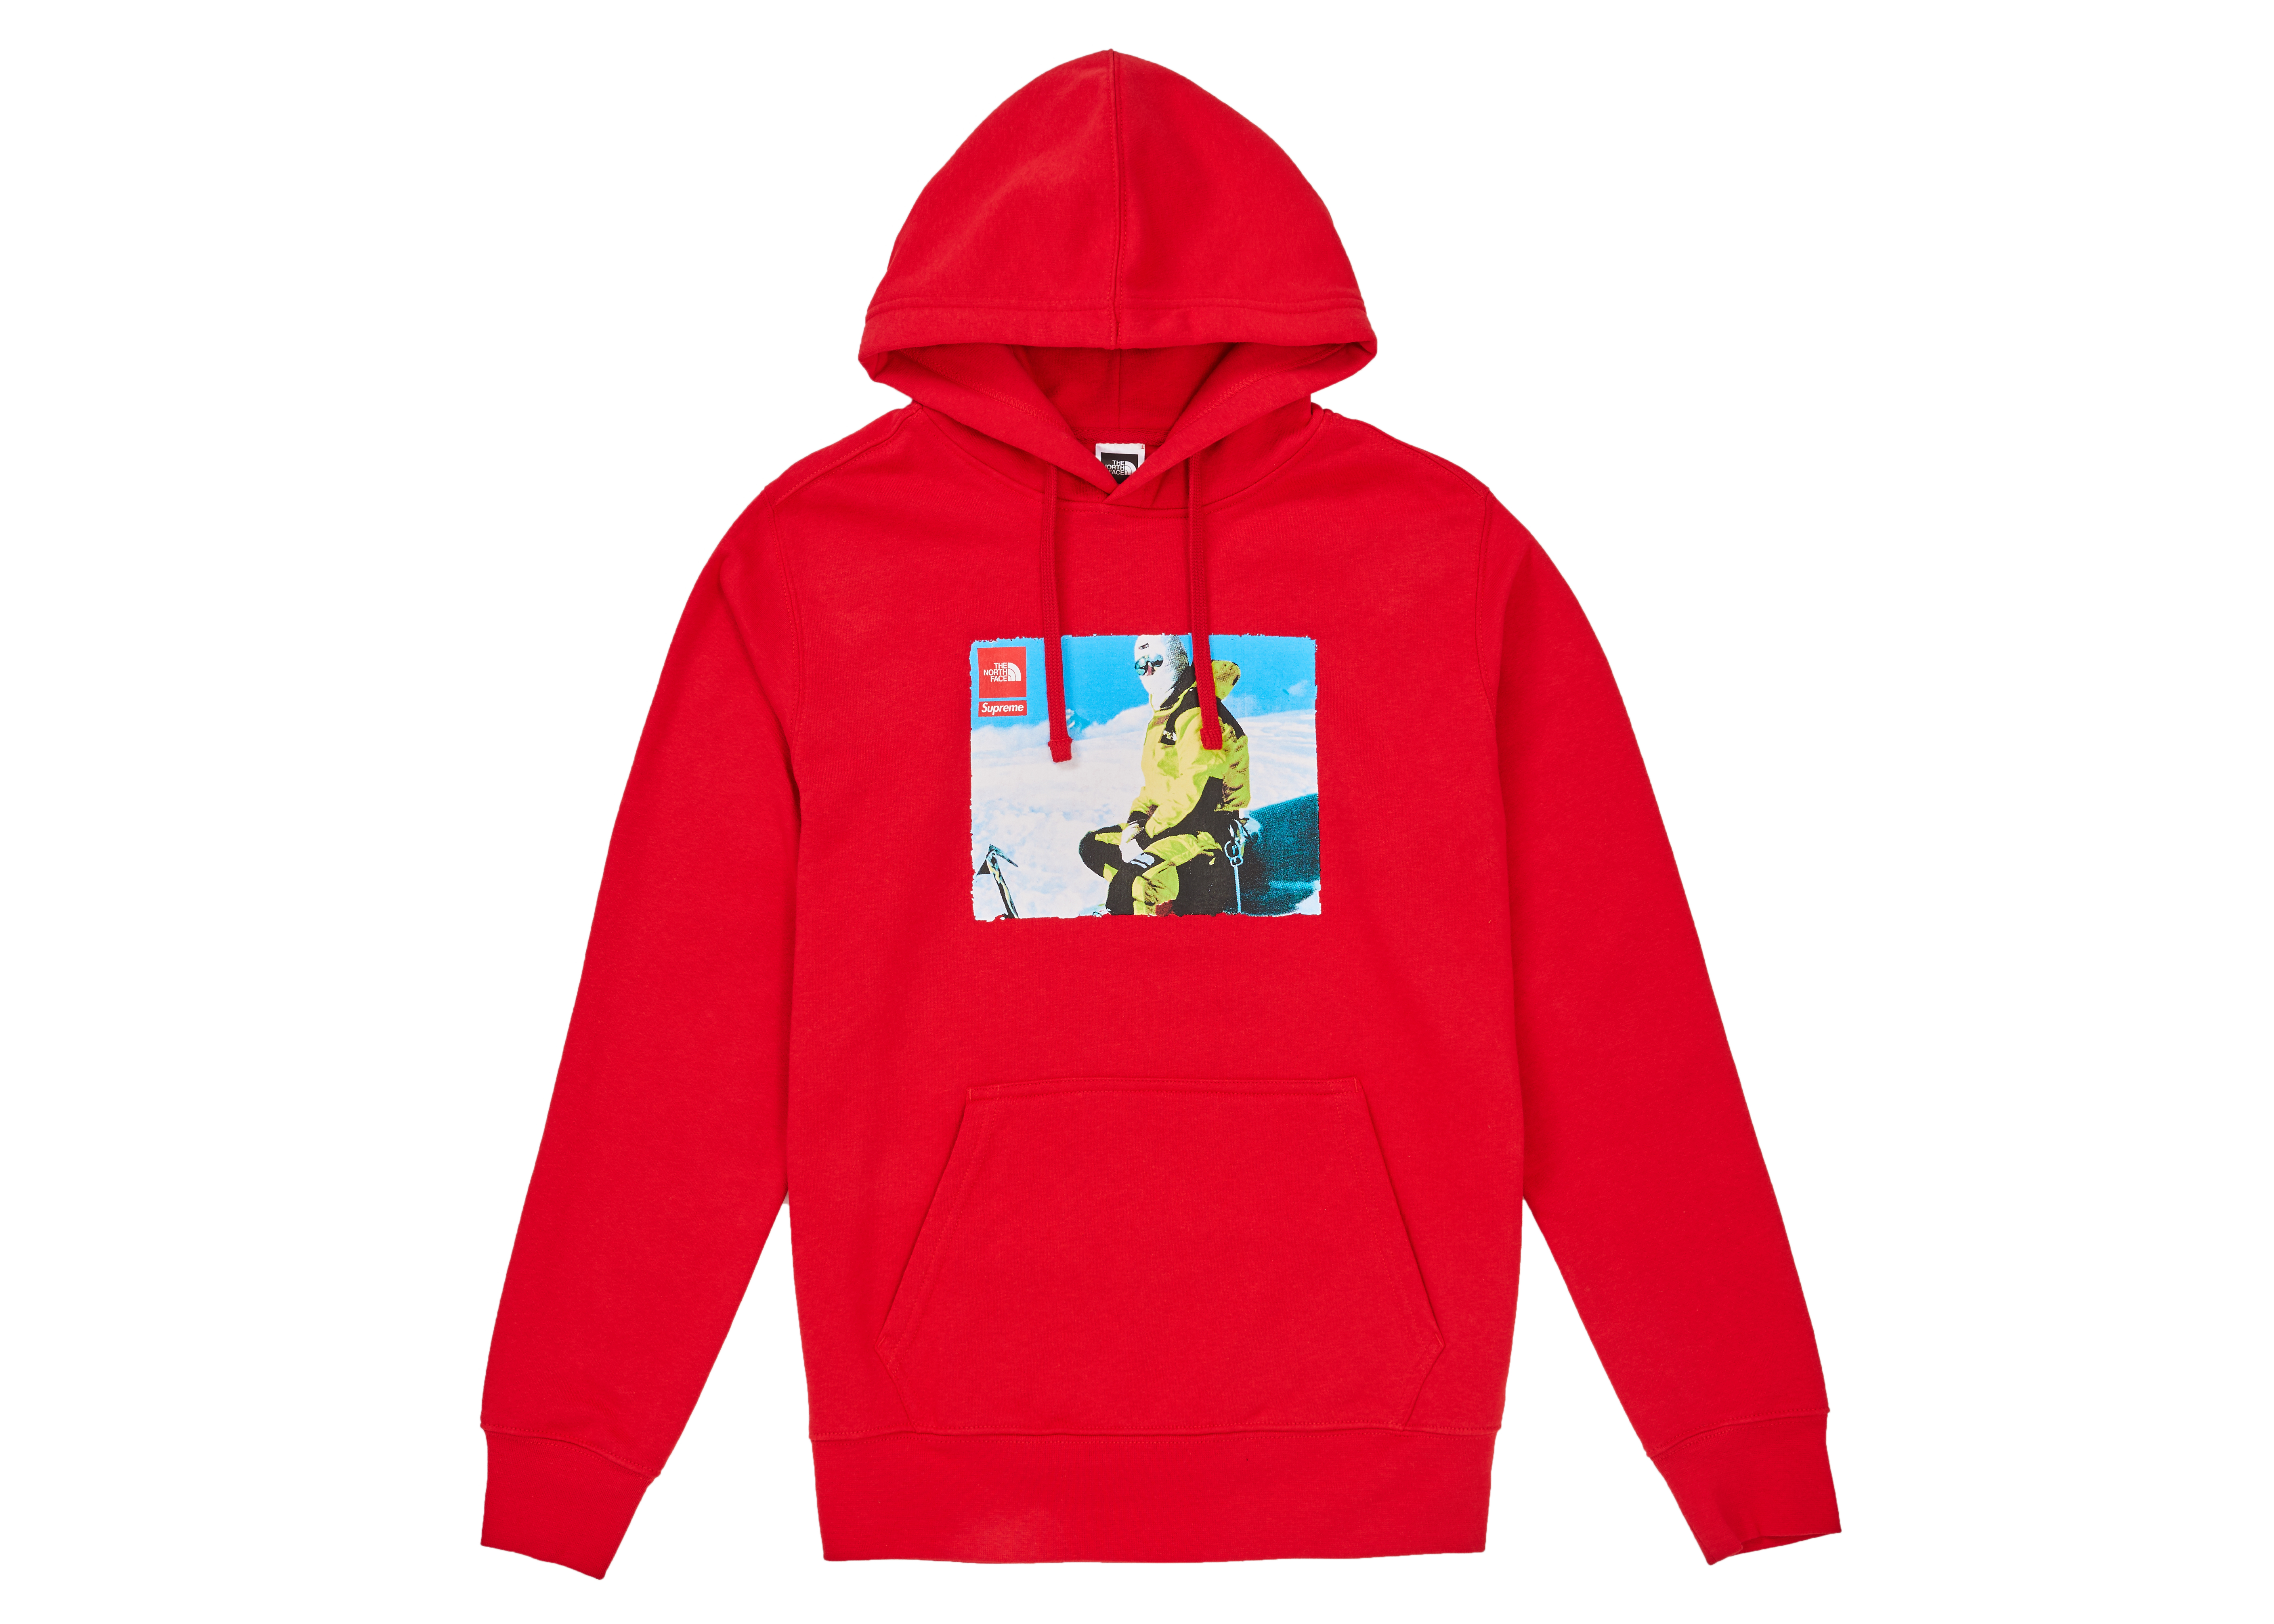 Supreme The North Face Hooded Sweatshirt